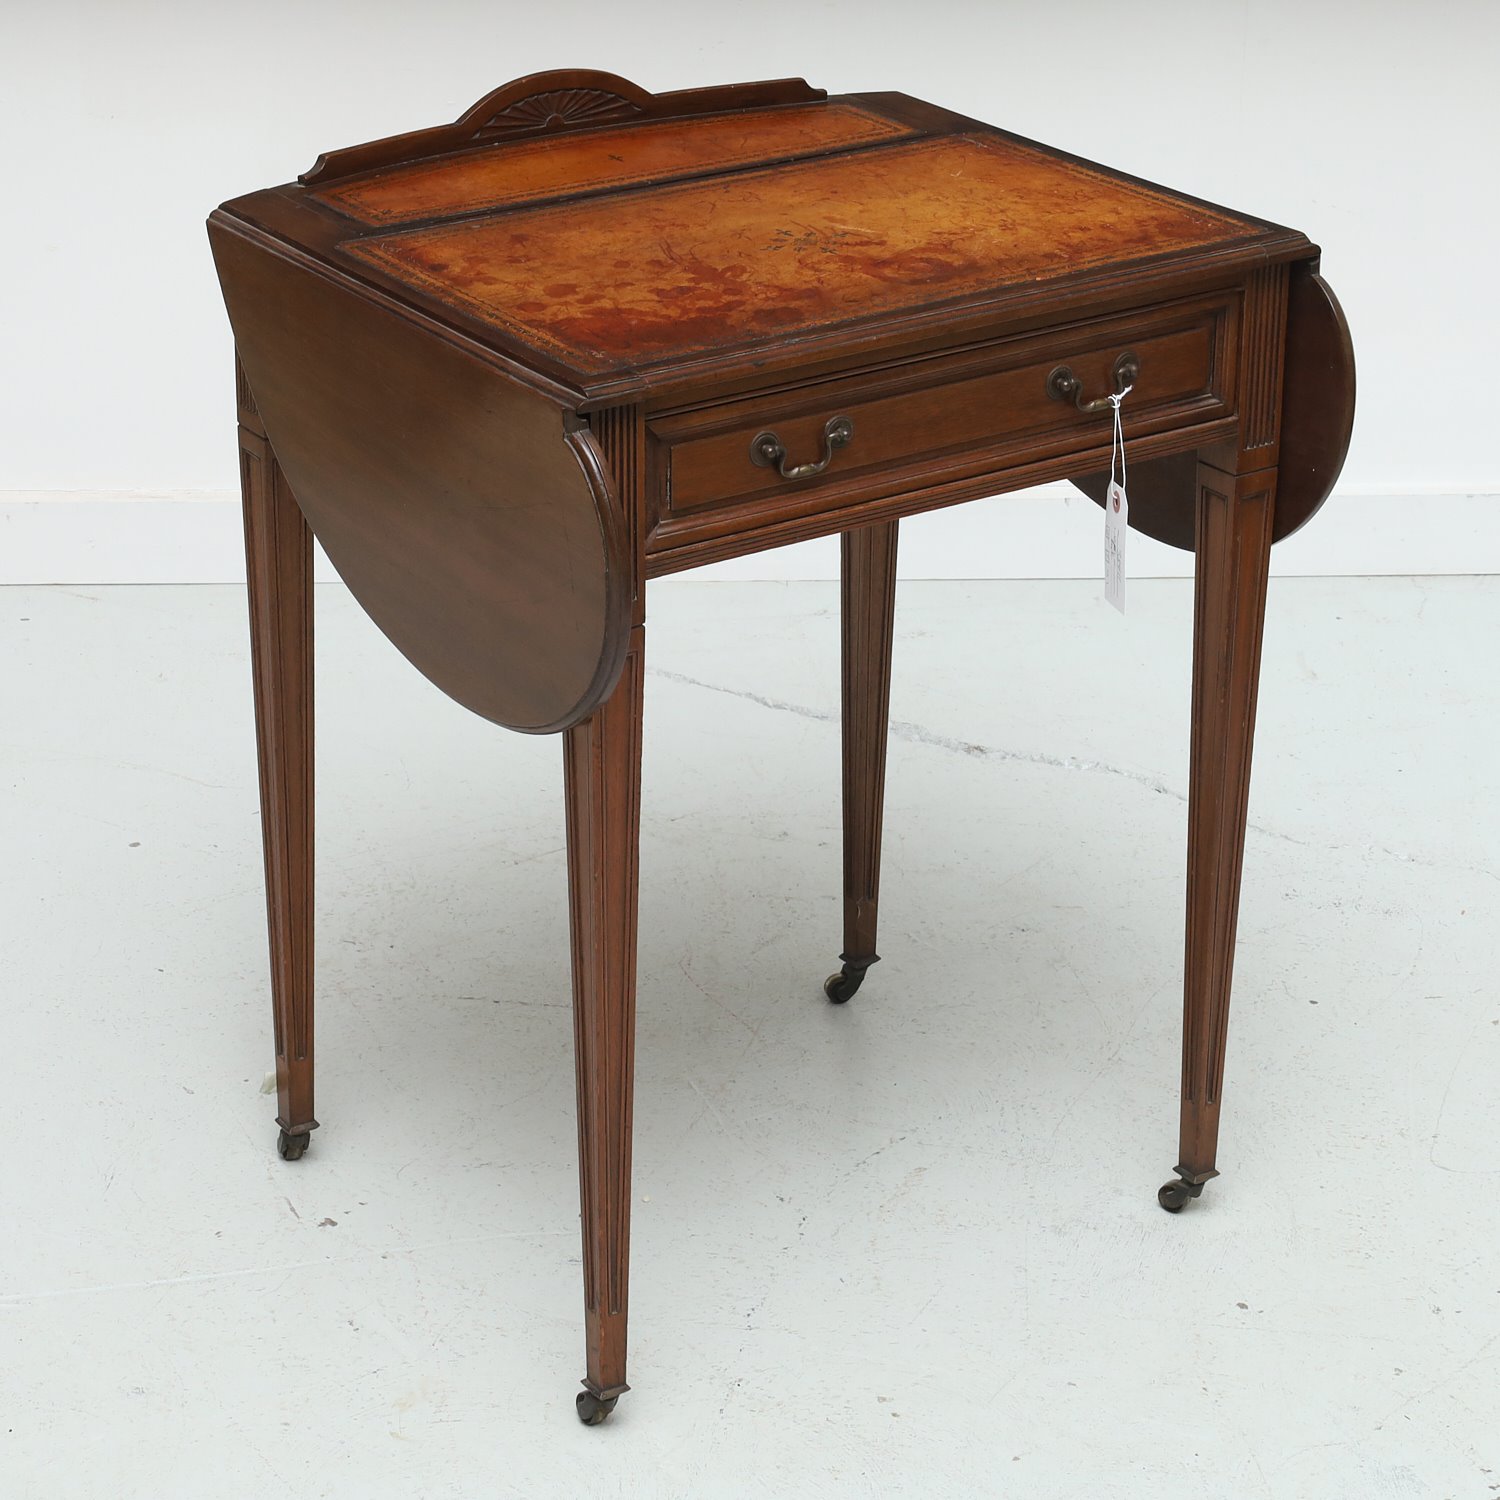 EDWARDIAN WRITING TABLE BY JAMES